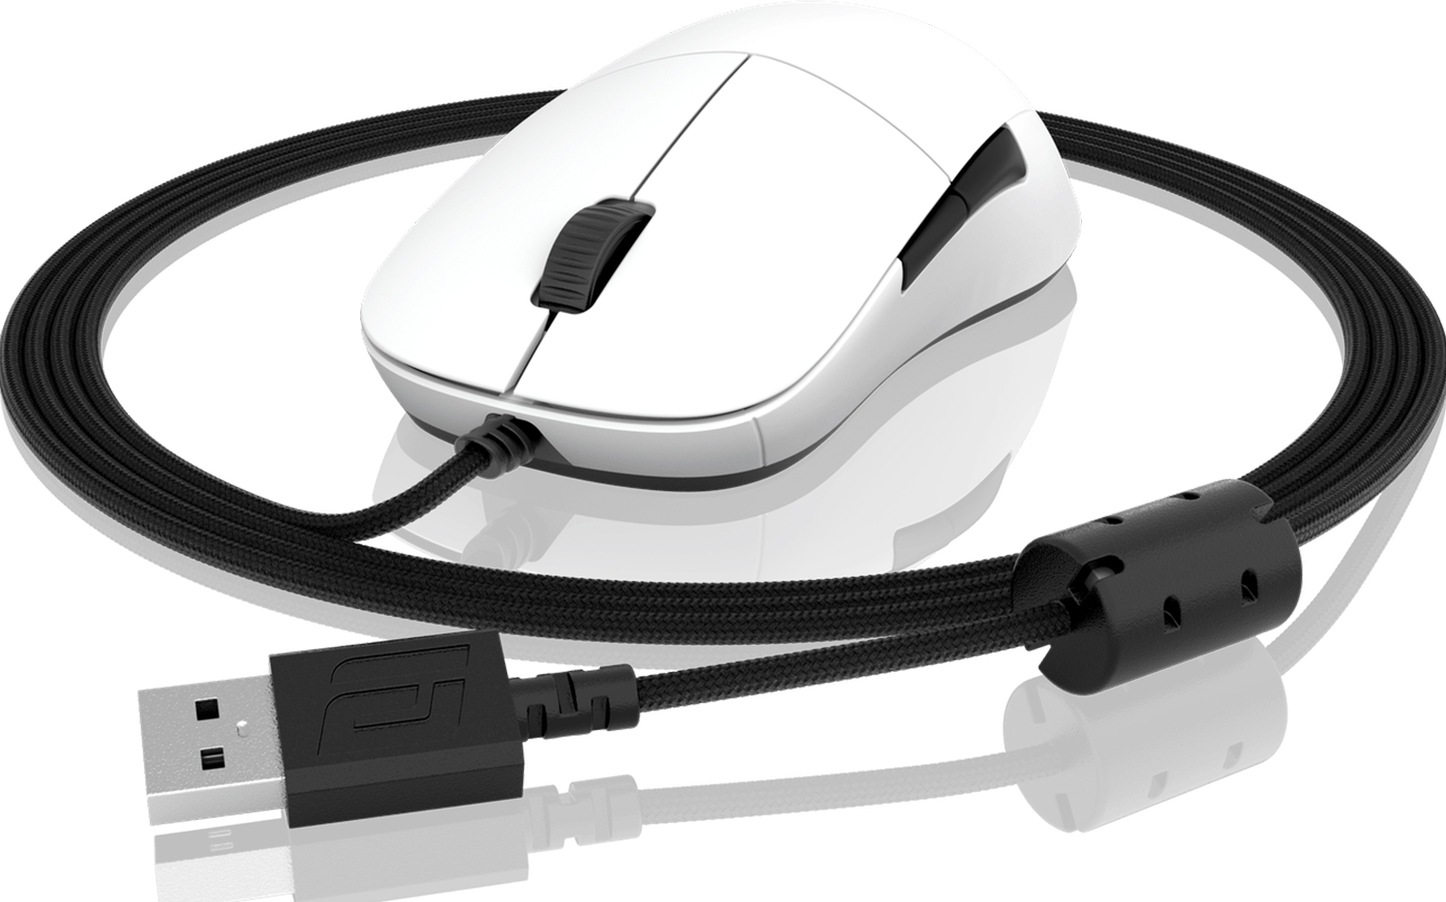 Endgame Gear XM1r Gaming Mouse - white - Pro GamersWare 1.28.63.12.003